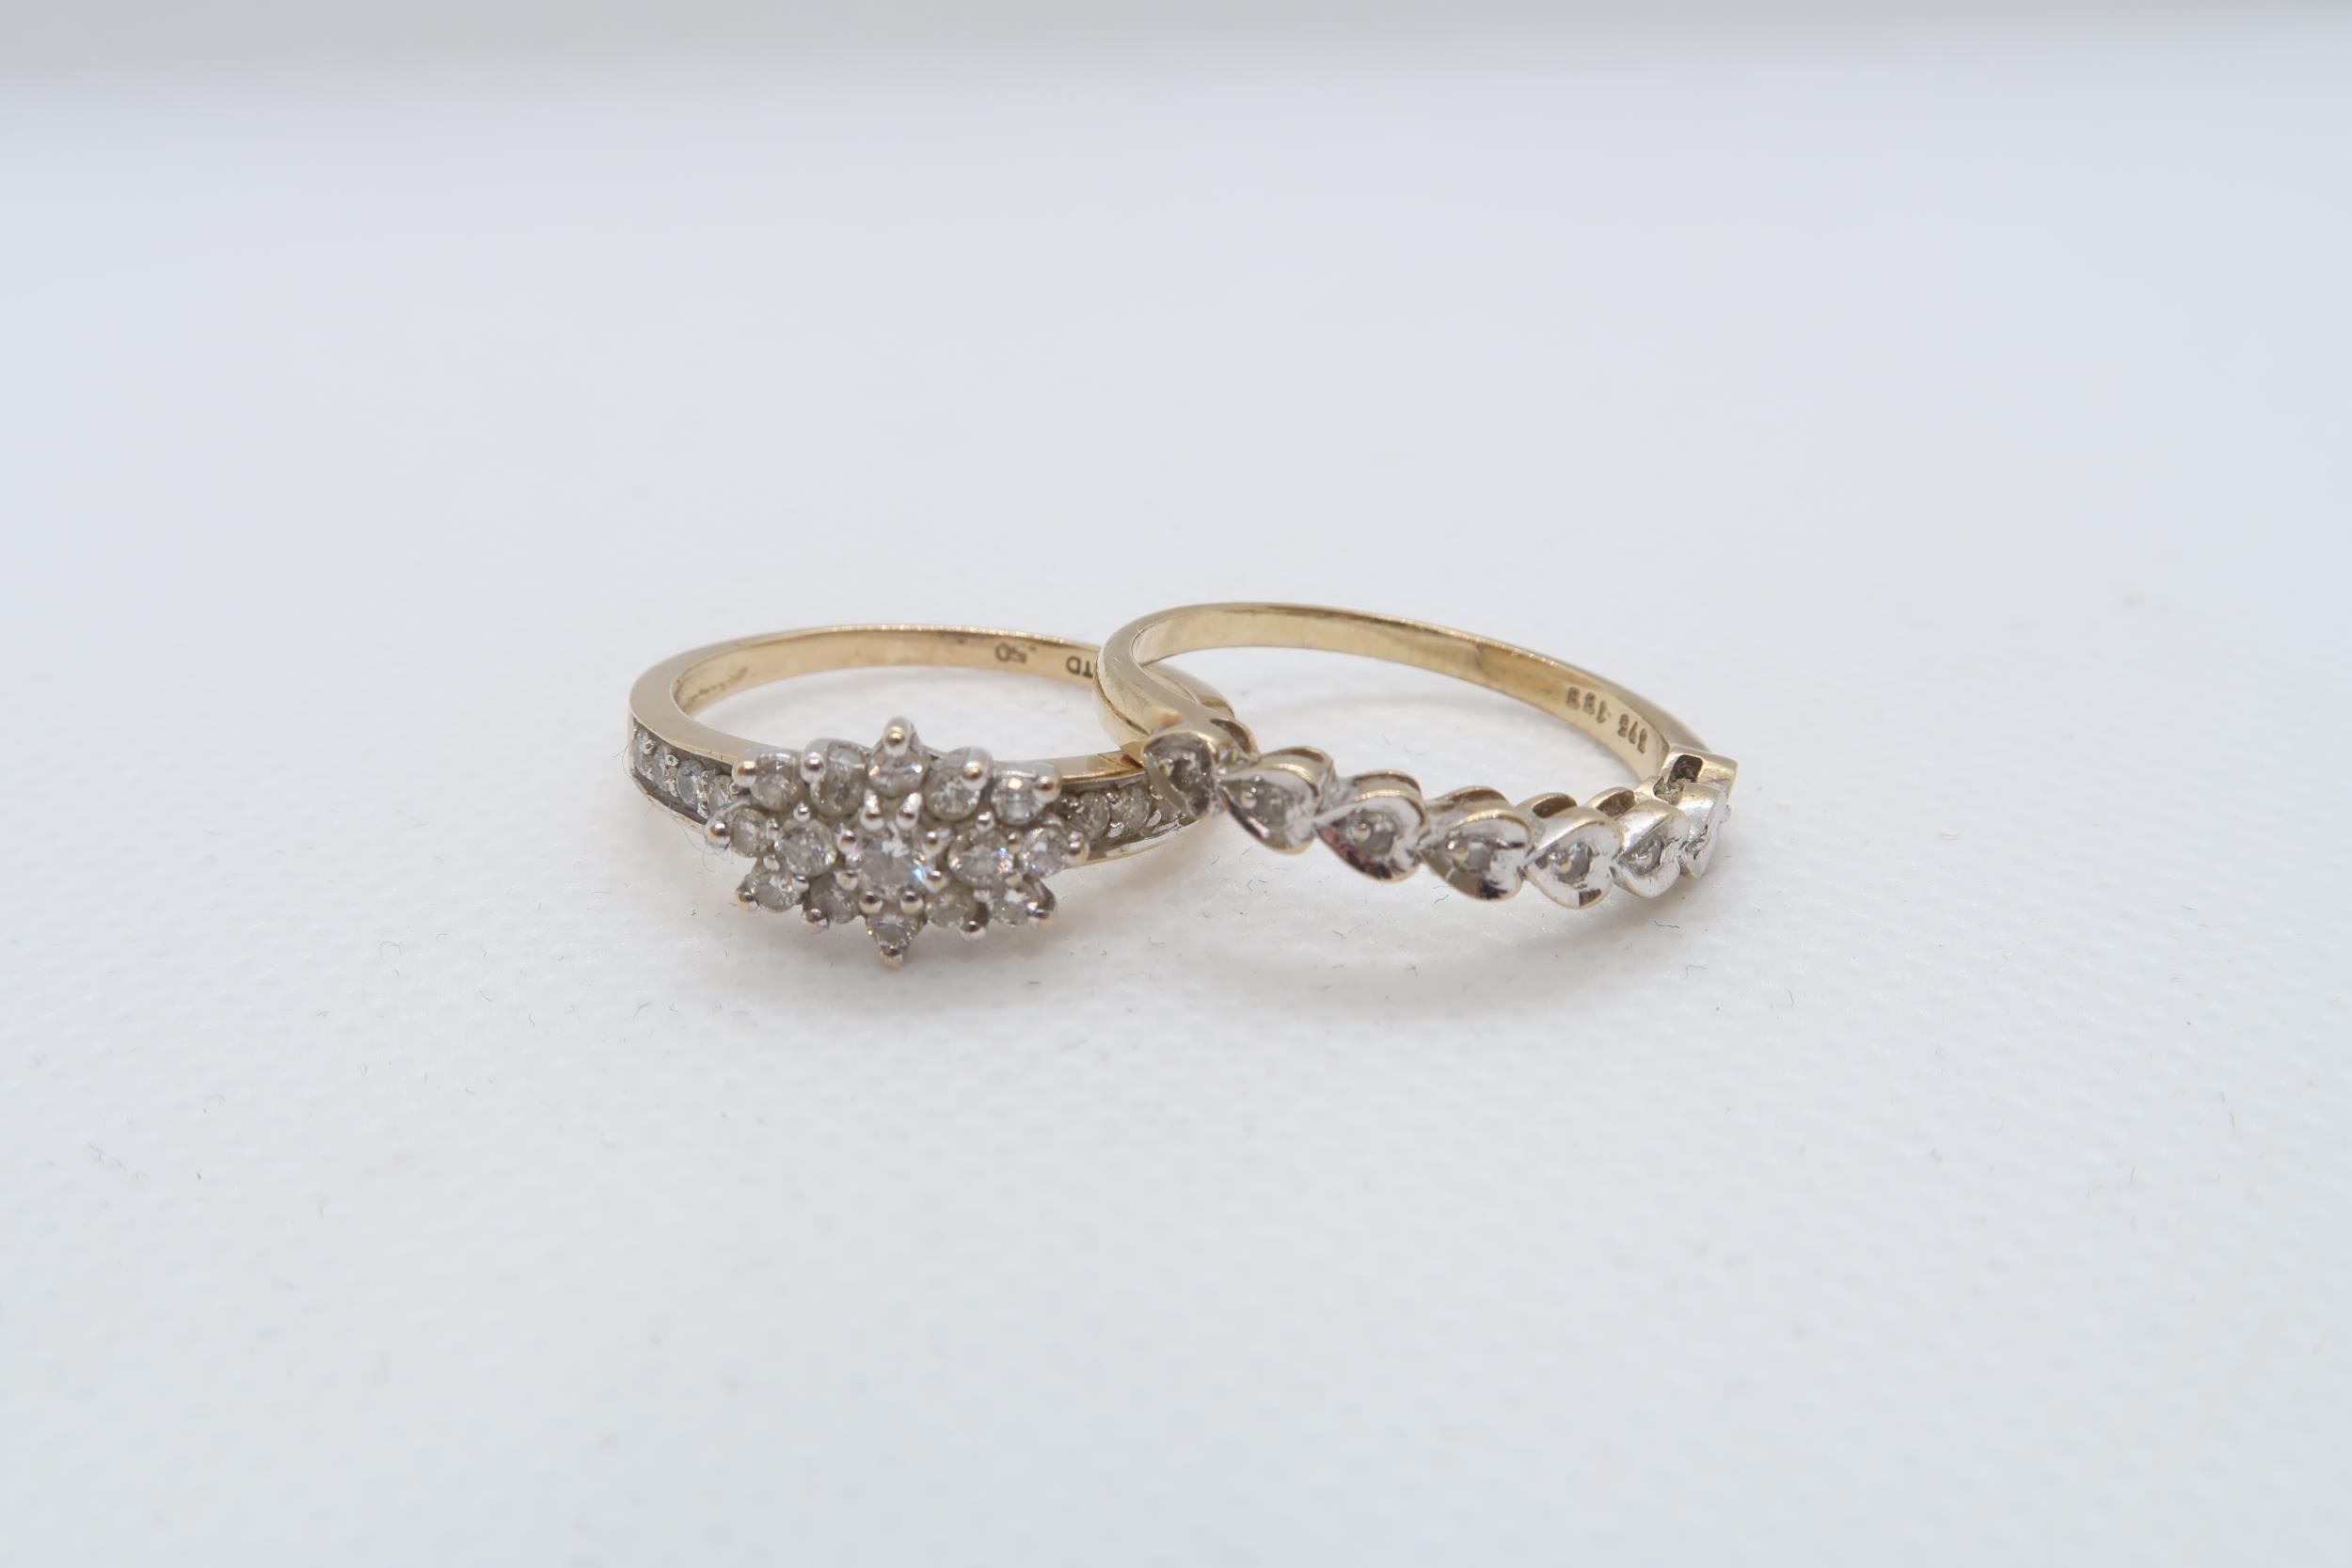 Two 9ct yellow gold (hallmarked) and diamond rings sizes P/Q & P - total weight approx 4.2 grams